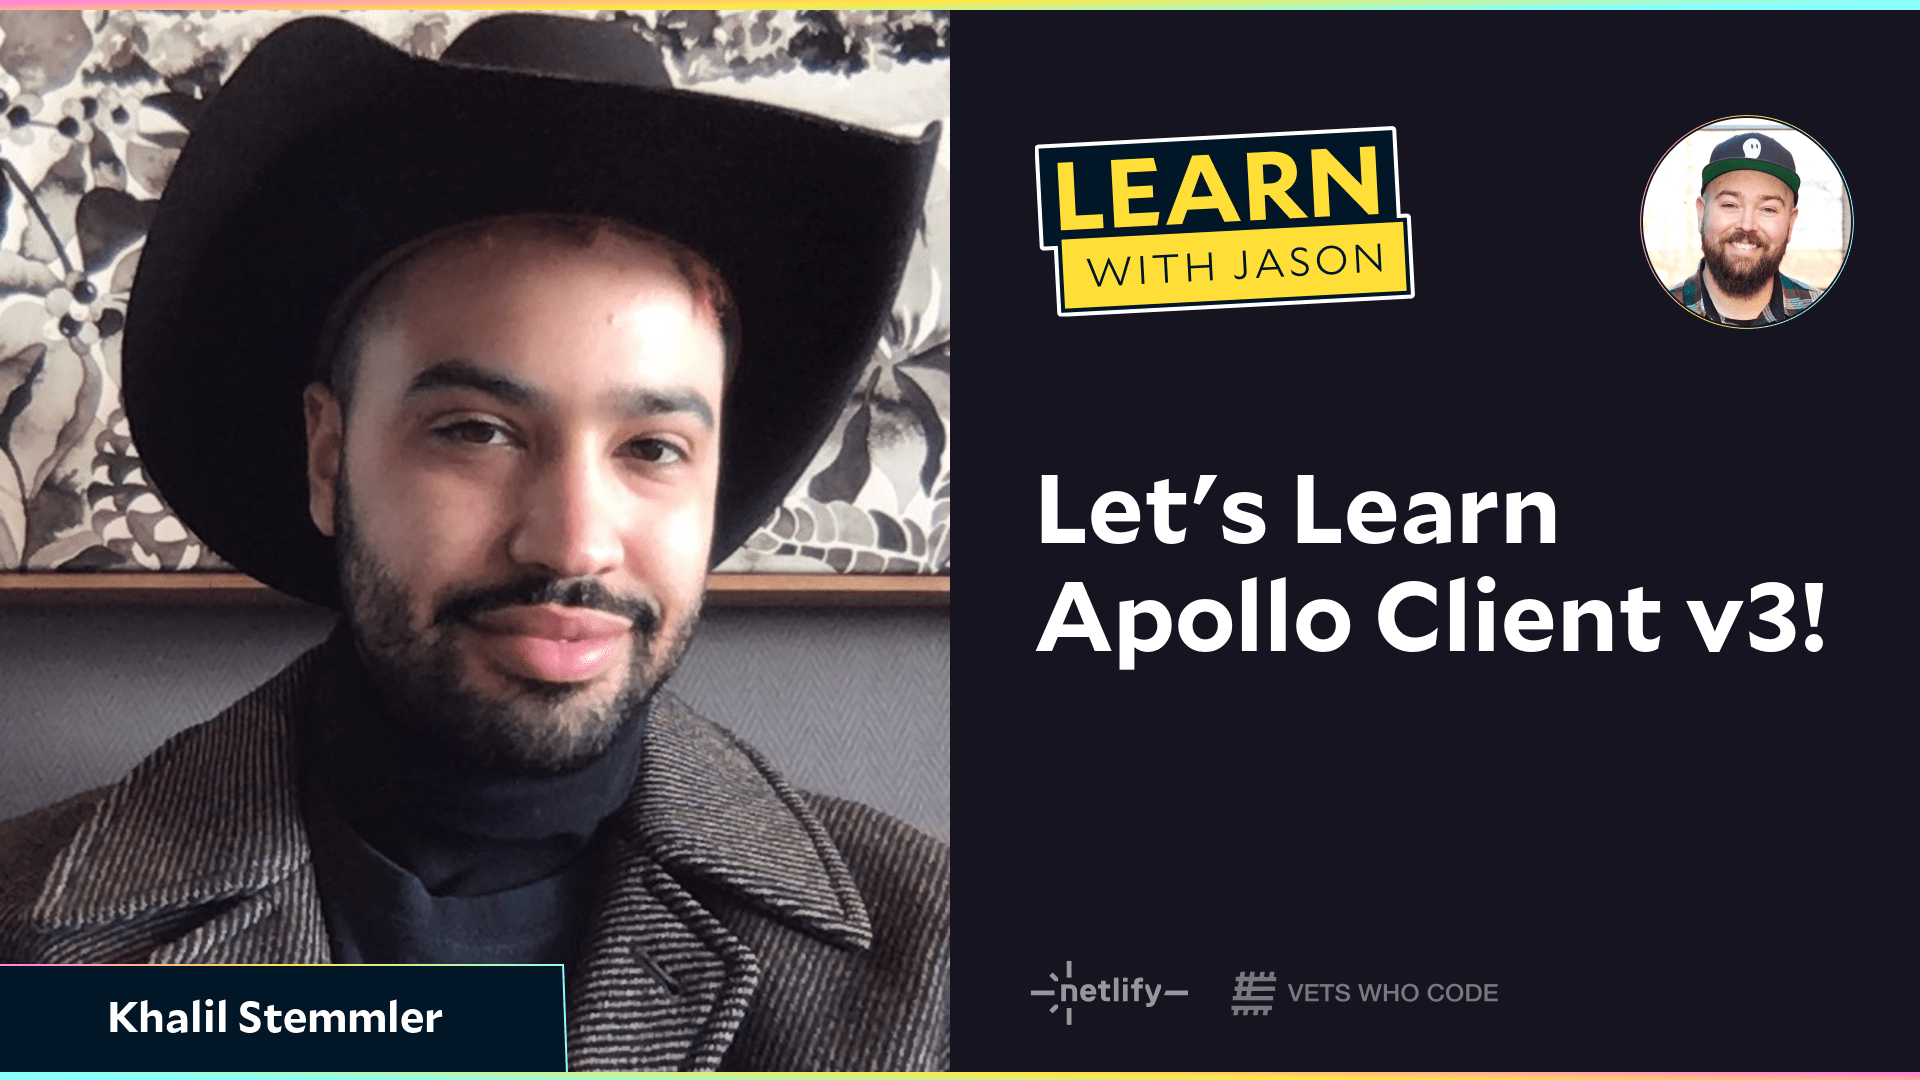 Let's Learn Apollo Client v3! (with Khalil Stemmler)